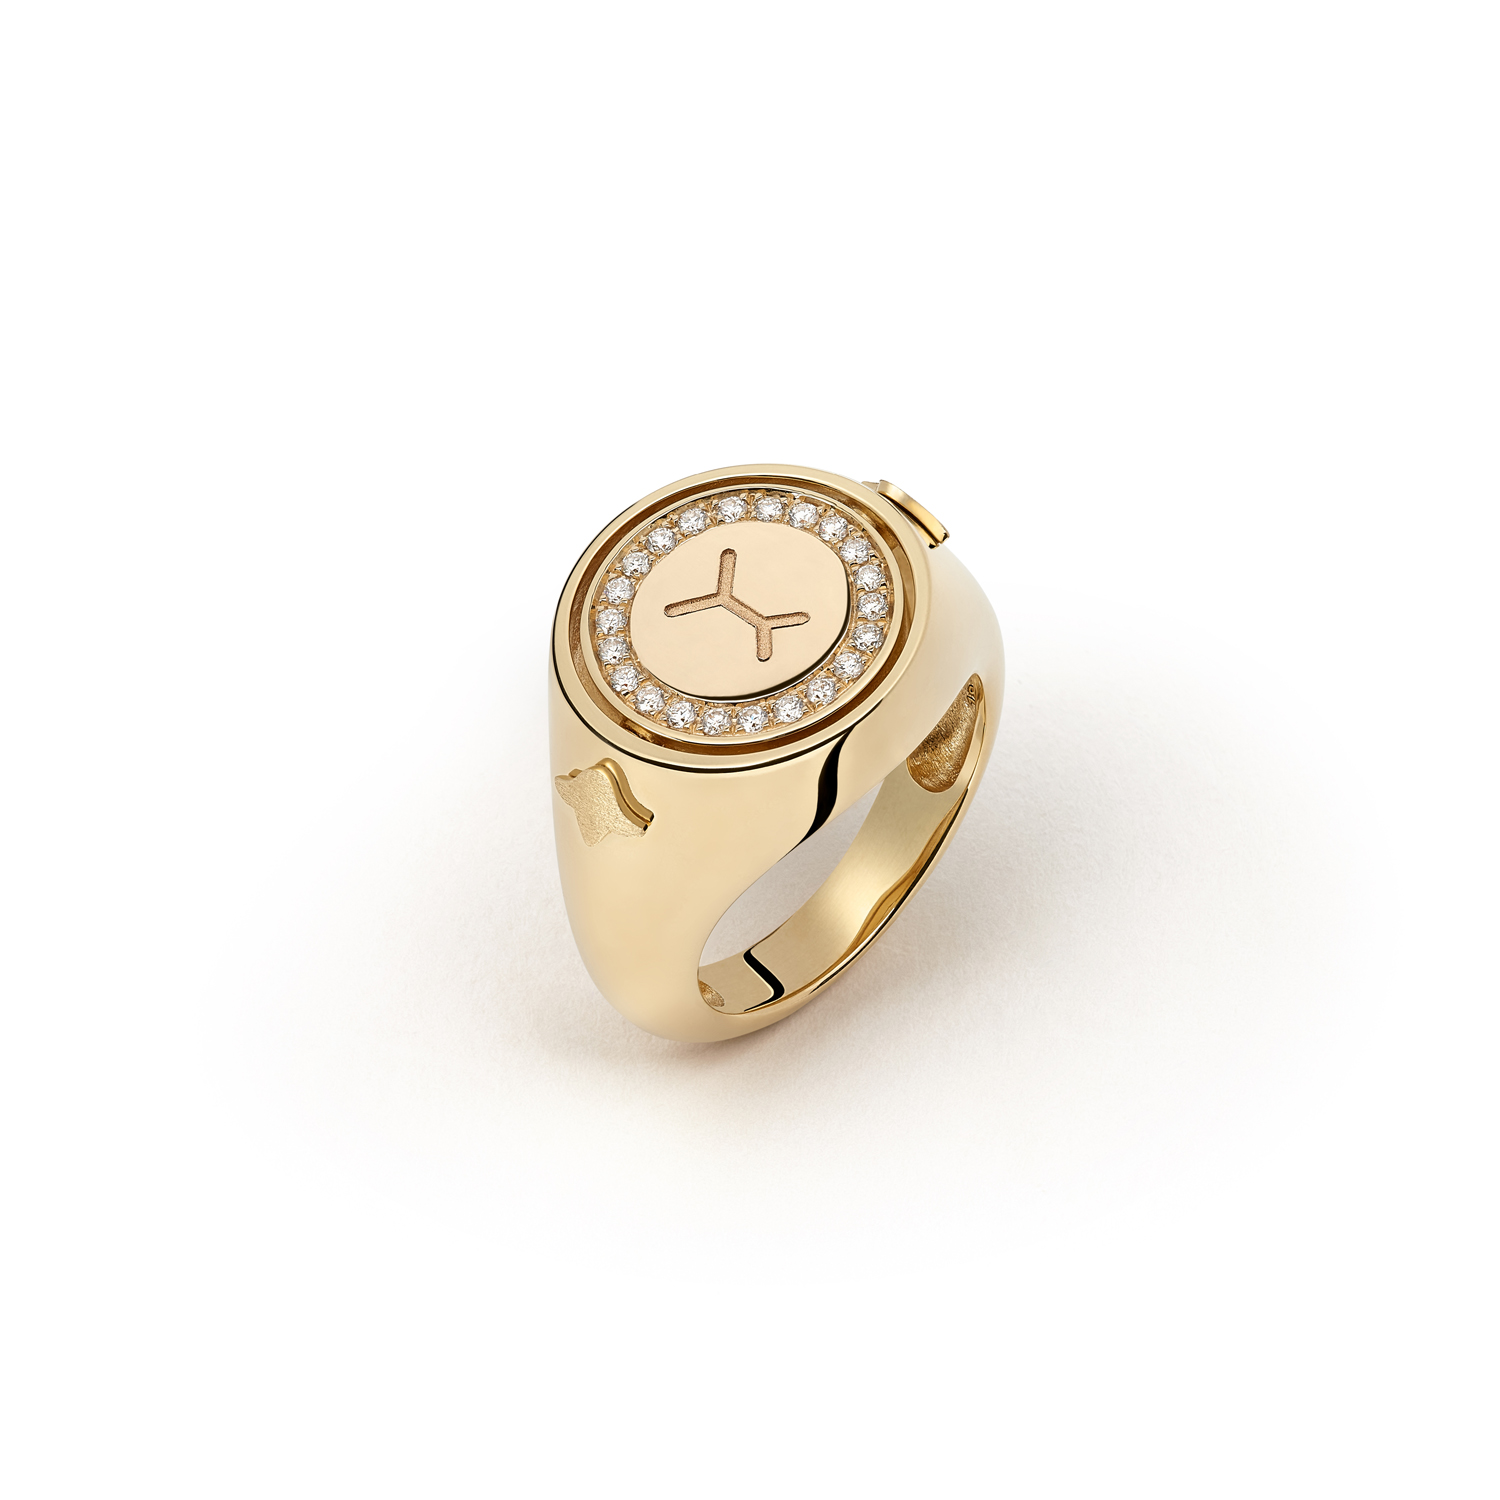 Turnable Paved Cocktail Ring